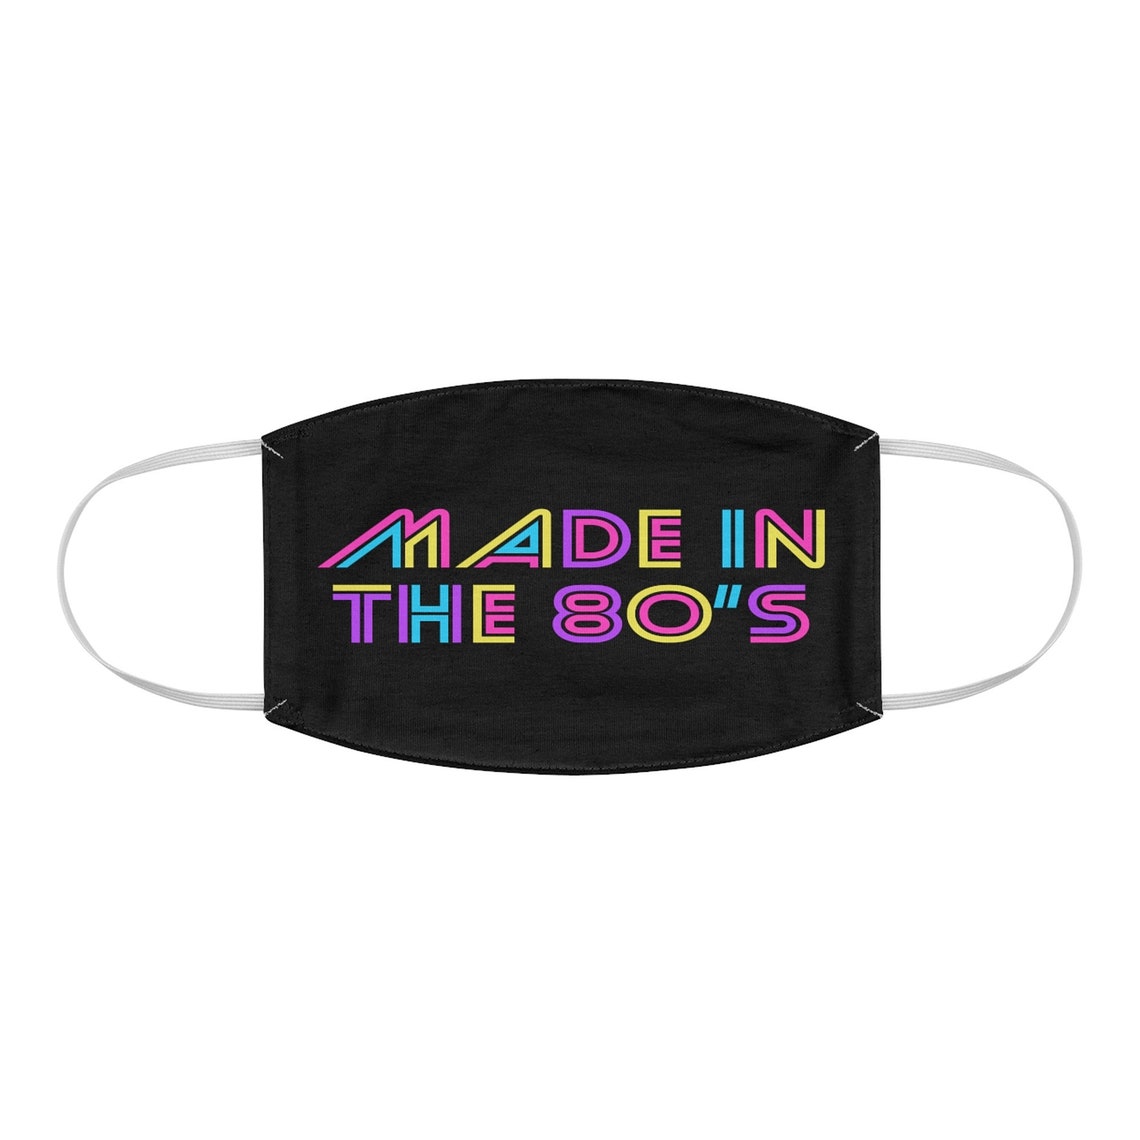 Made In The 80's Face Mask Washable Reusable Retro Face image 1